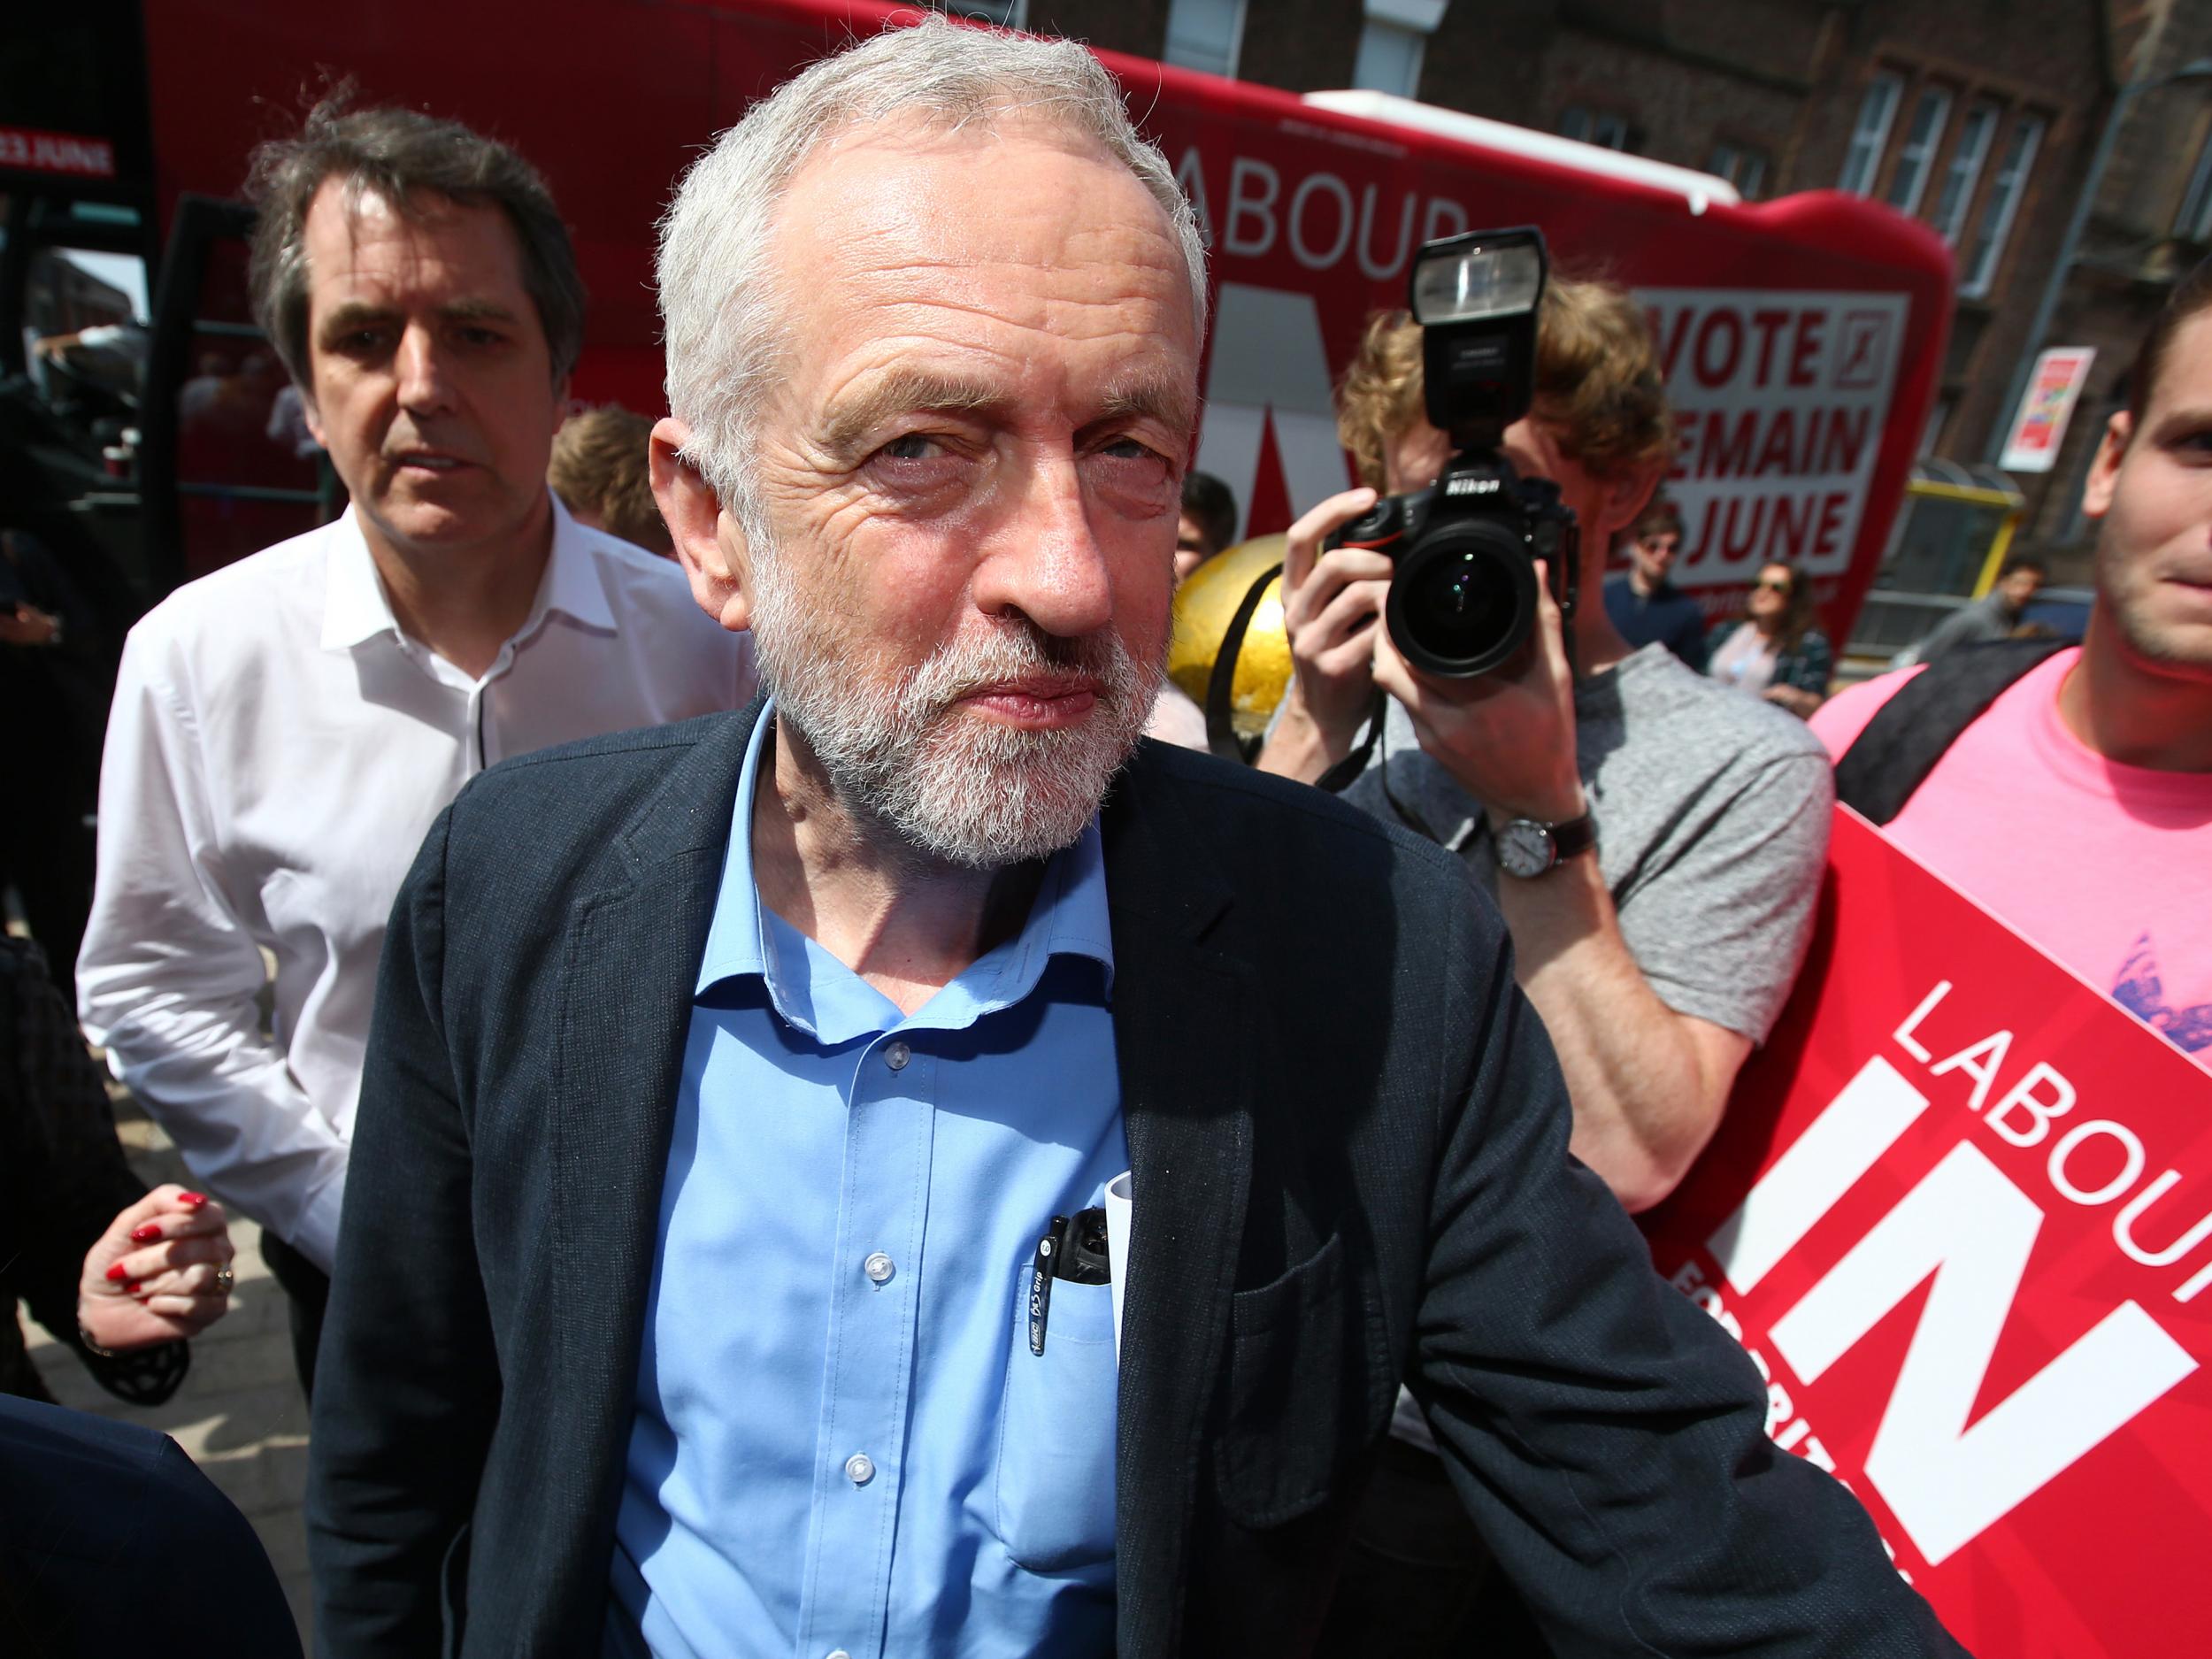 Corbyn was upbeat as he arrived at a student voter rally in Liverpool yesterday